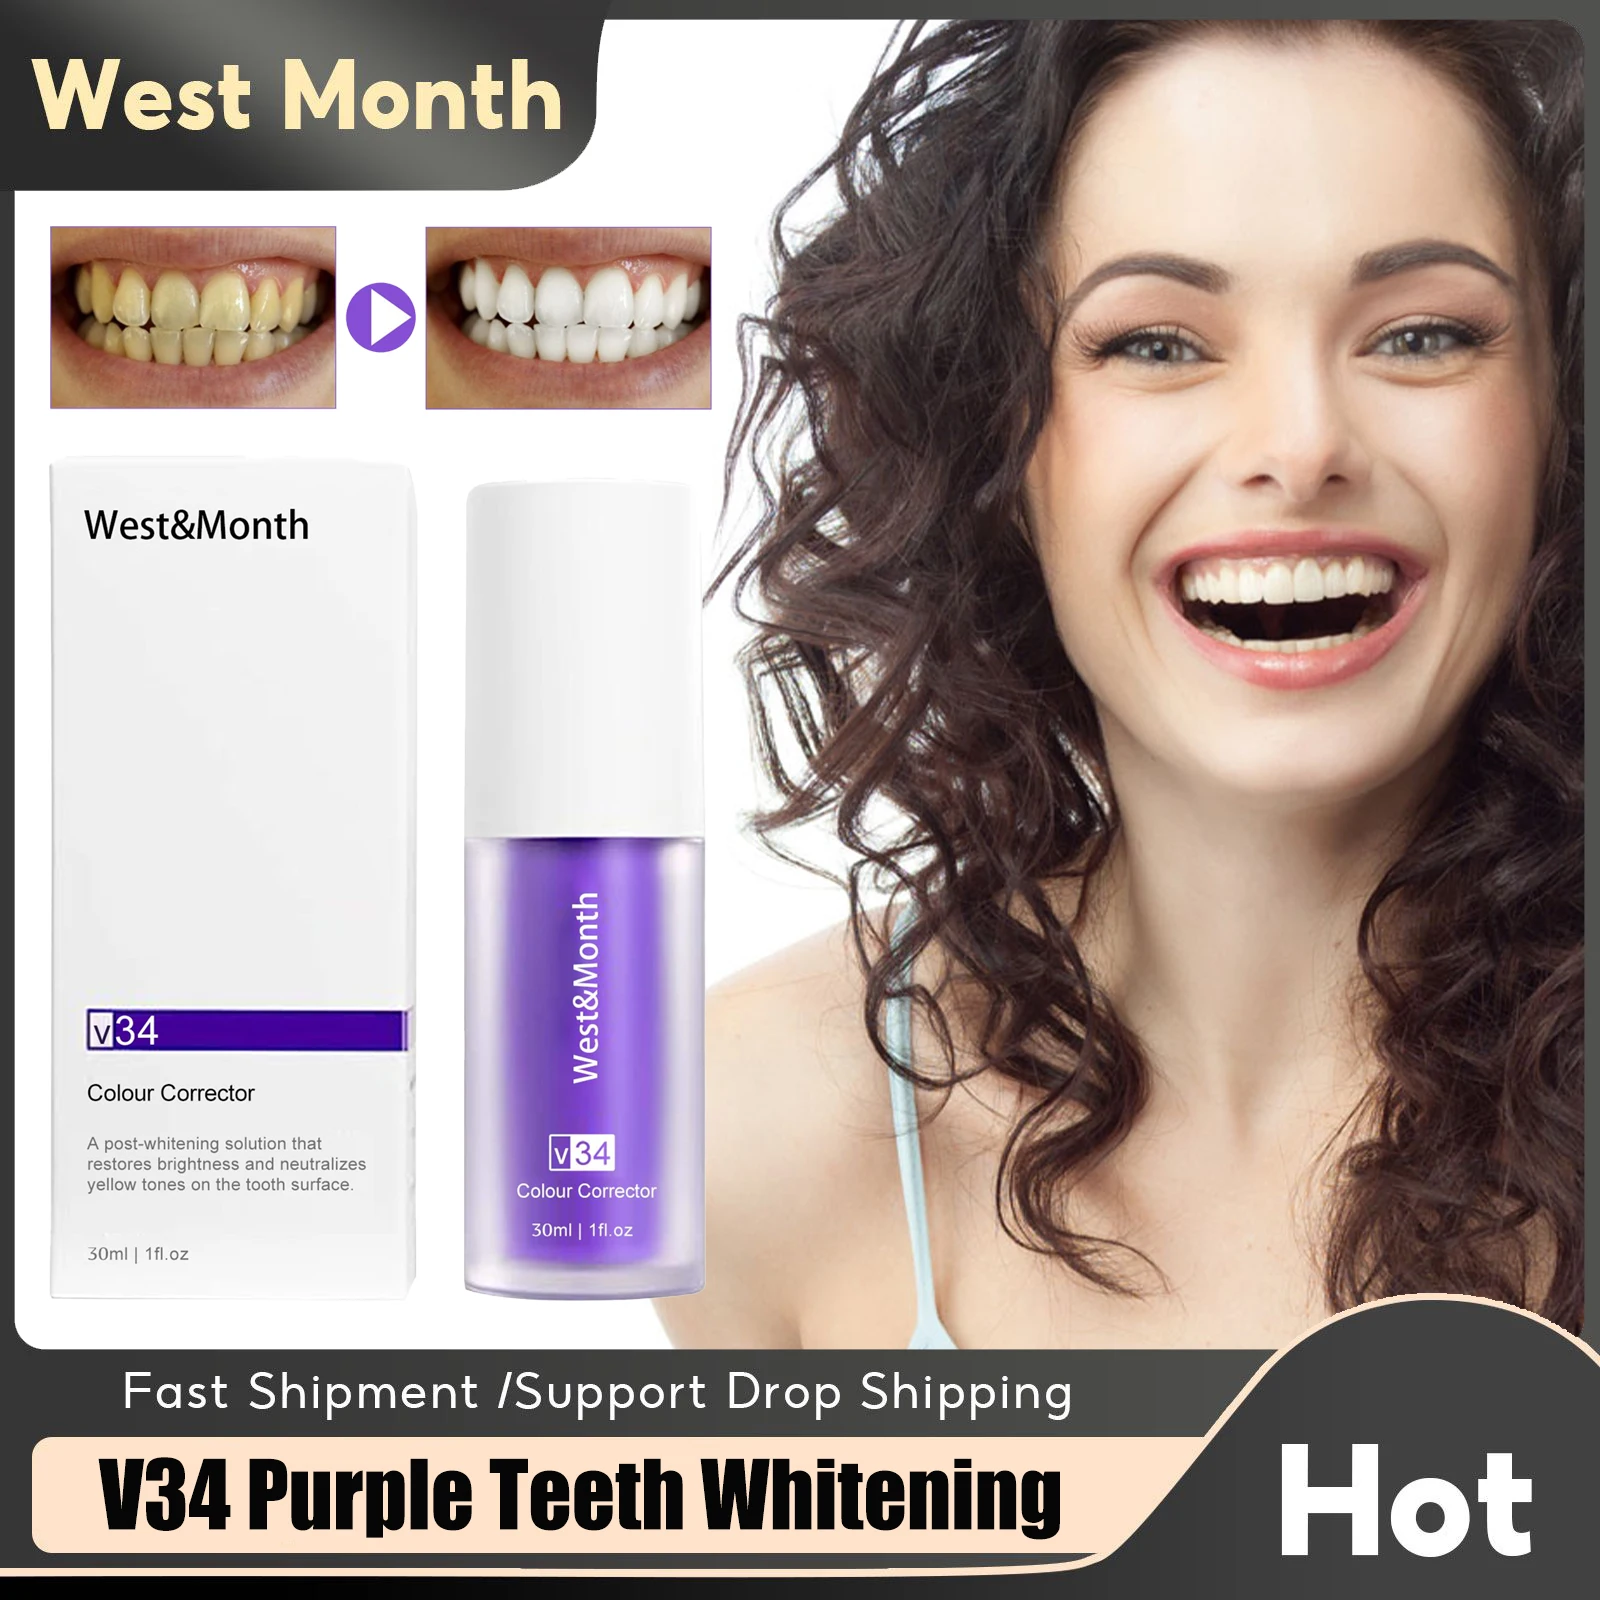 

Teeth Whitening Toothpaste Deep Cleansing V34 Colour Corrector Remove Yellow Stains Freshens Breath Oral Care Purple Toothpaste